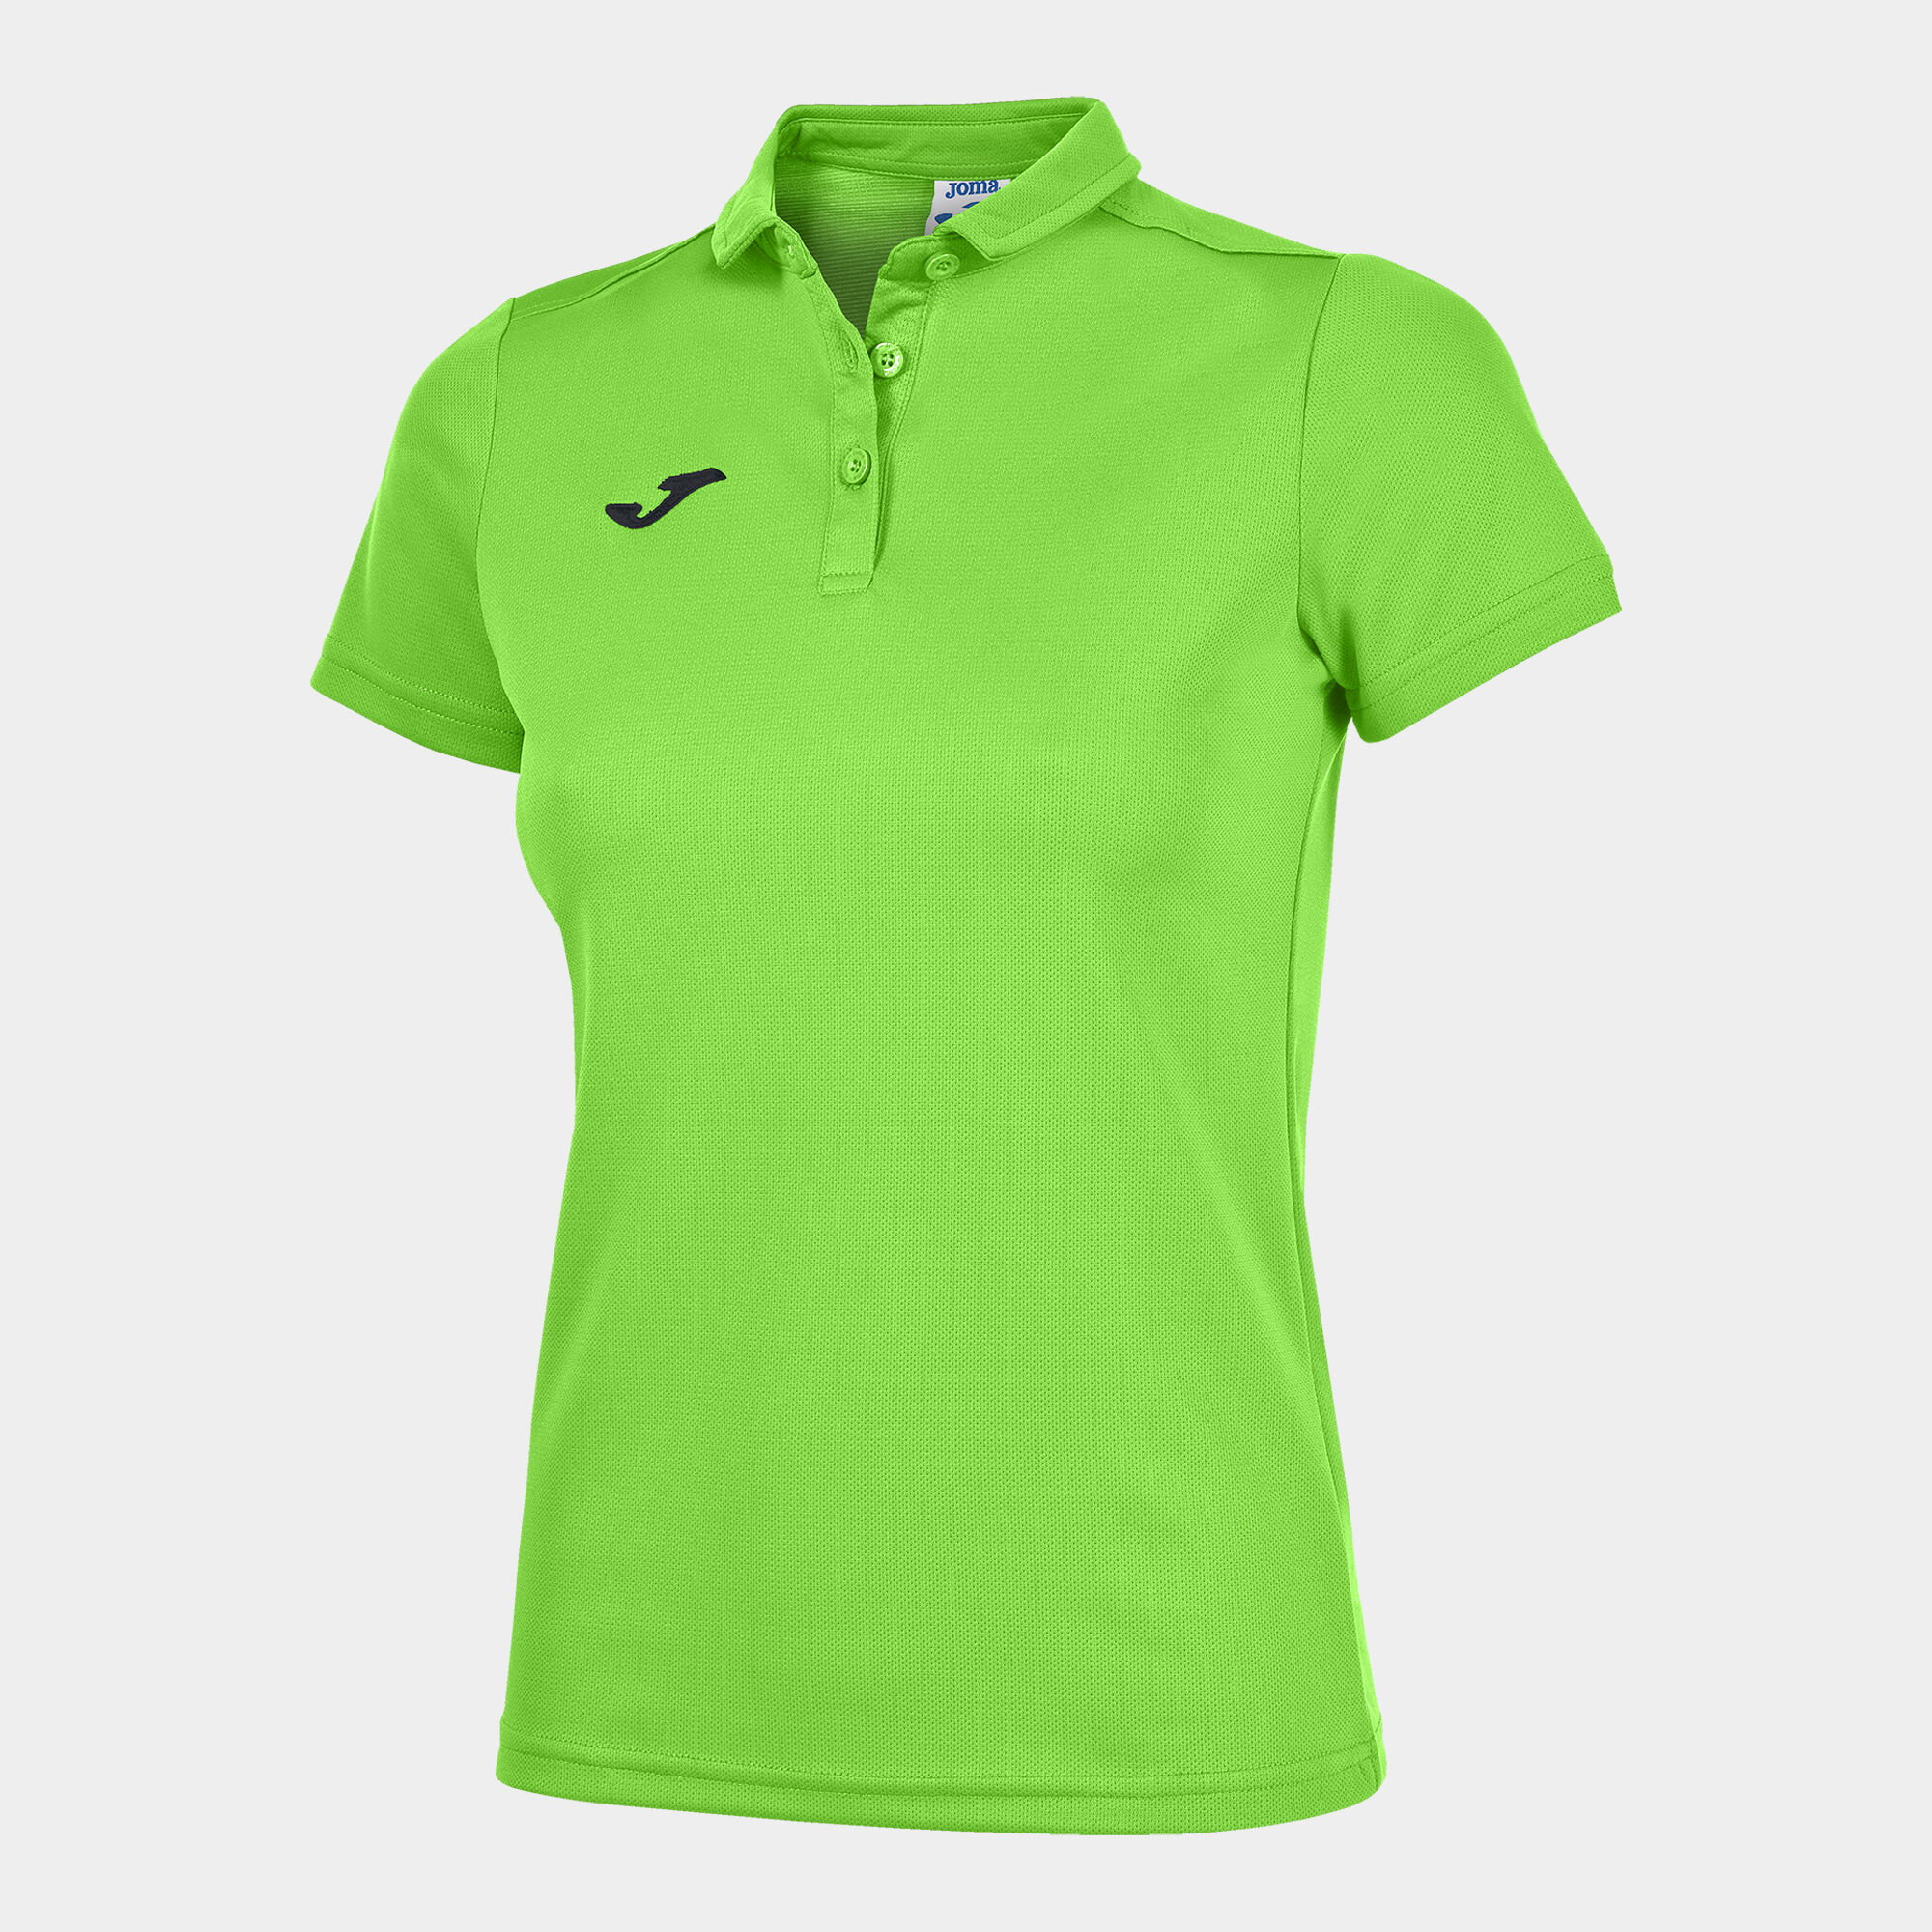 POLO MANCHES COURTES FEMME HOBBY VERT FLUO